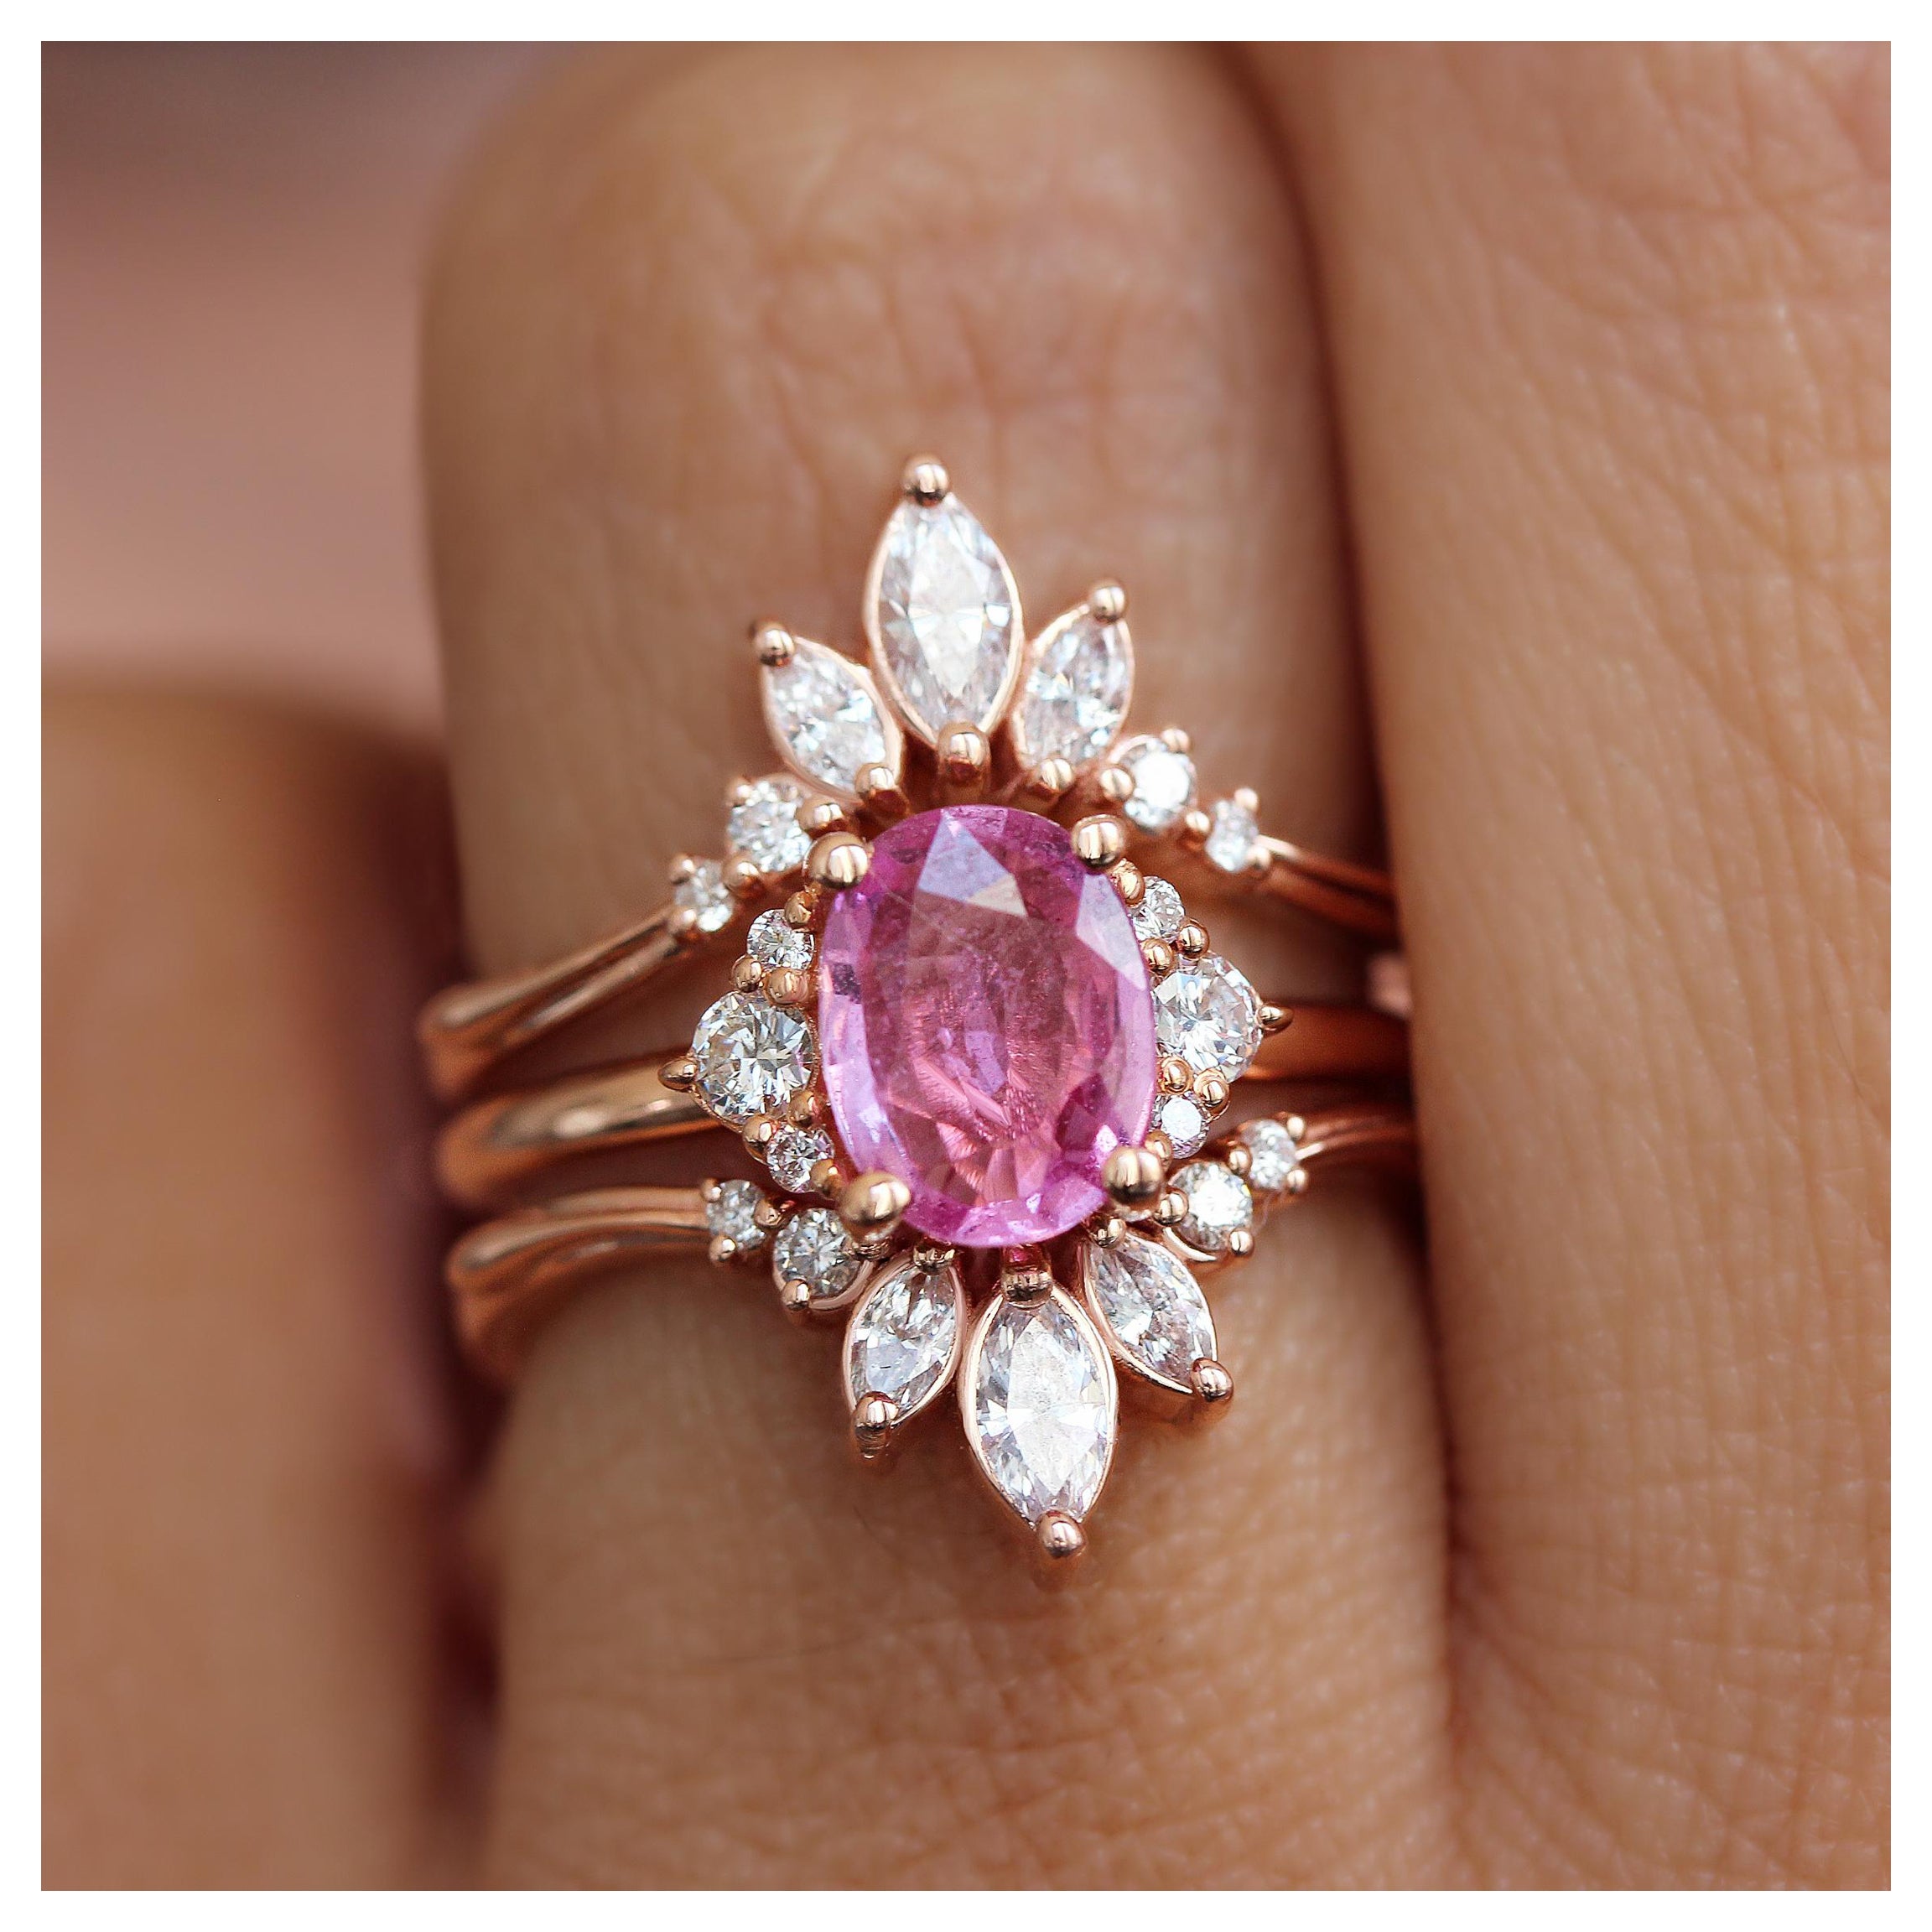 For Sale:  Oval Pink Sapphire and Diamonds Engagement Ring and Ring Guard Isabella Danielle